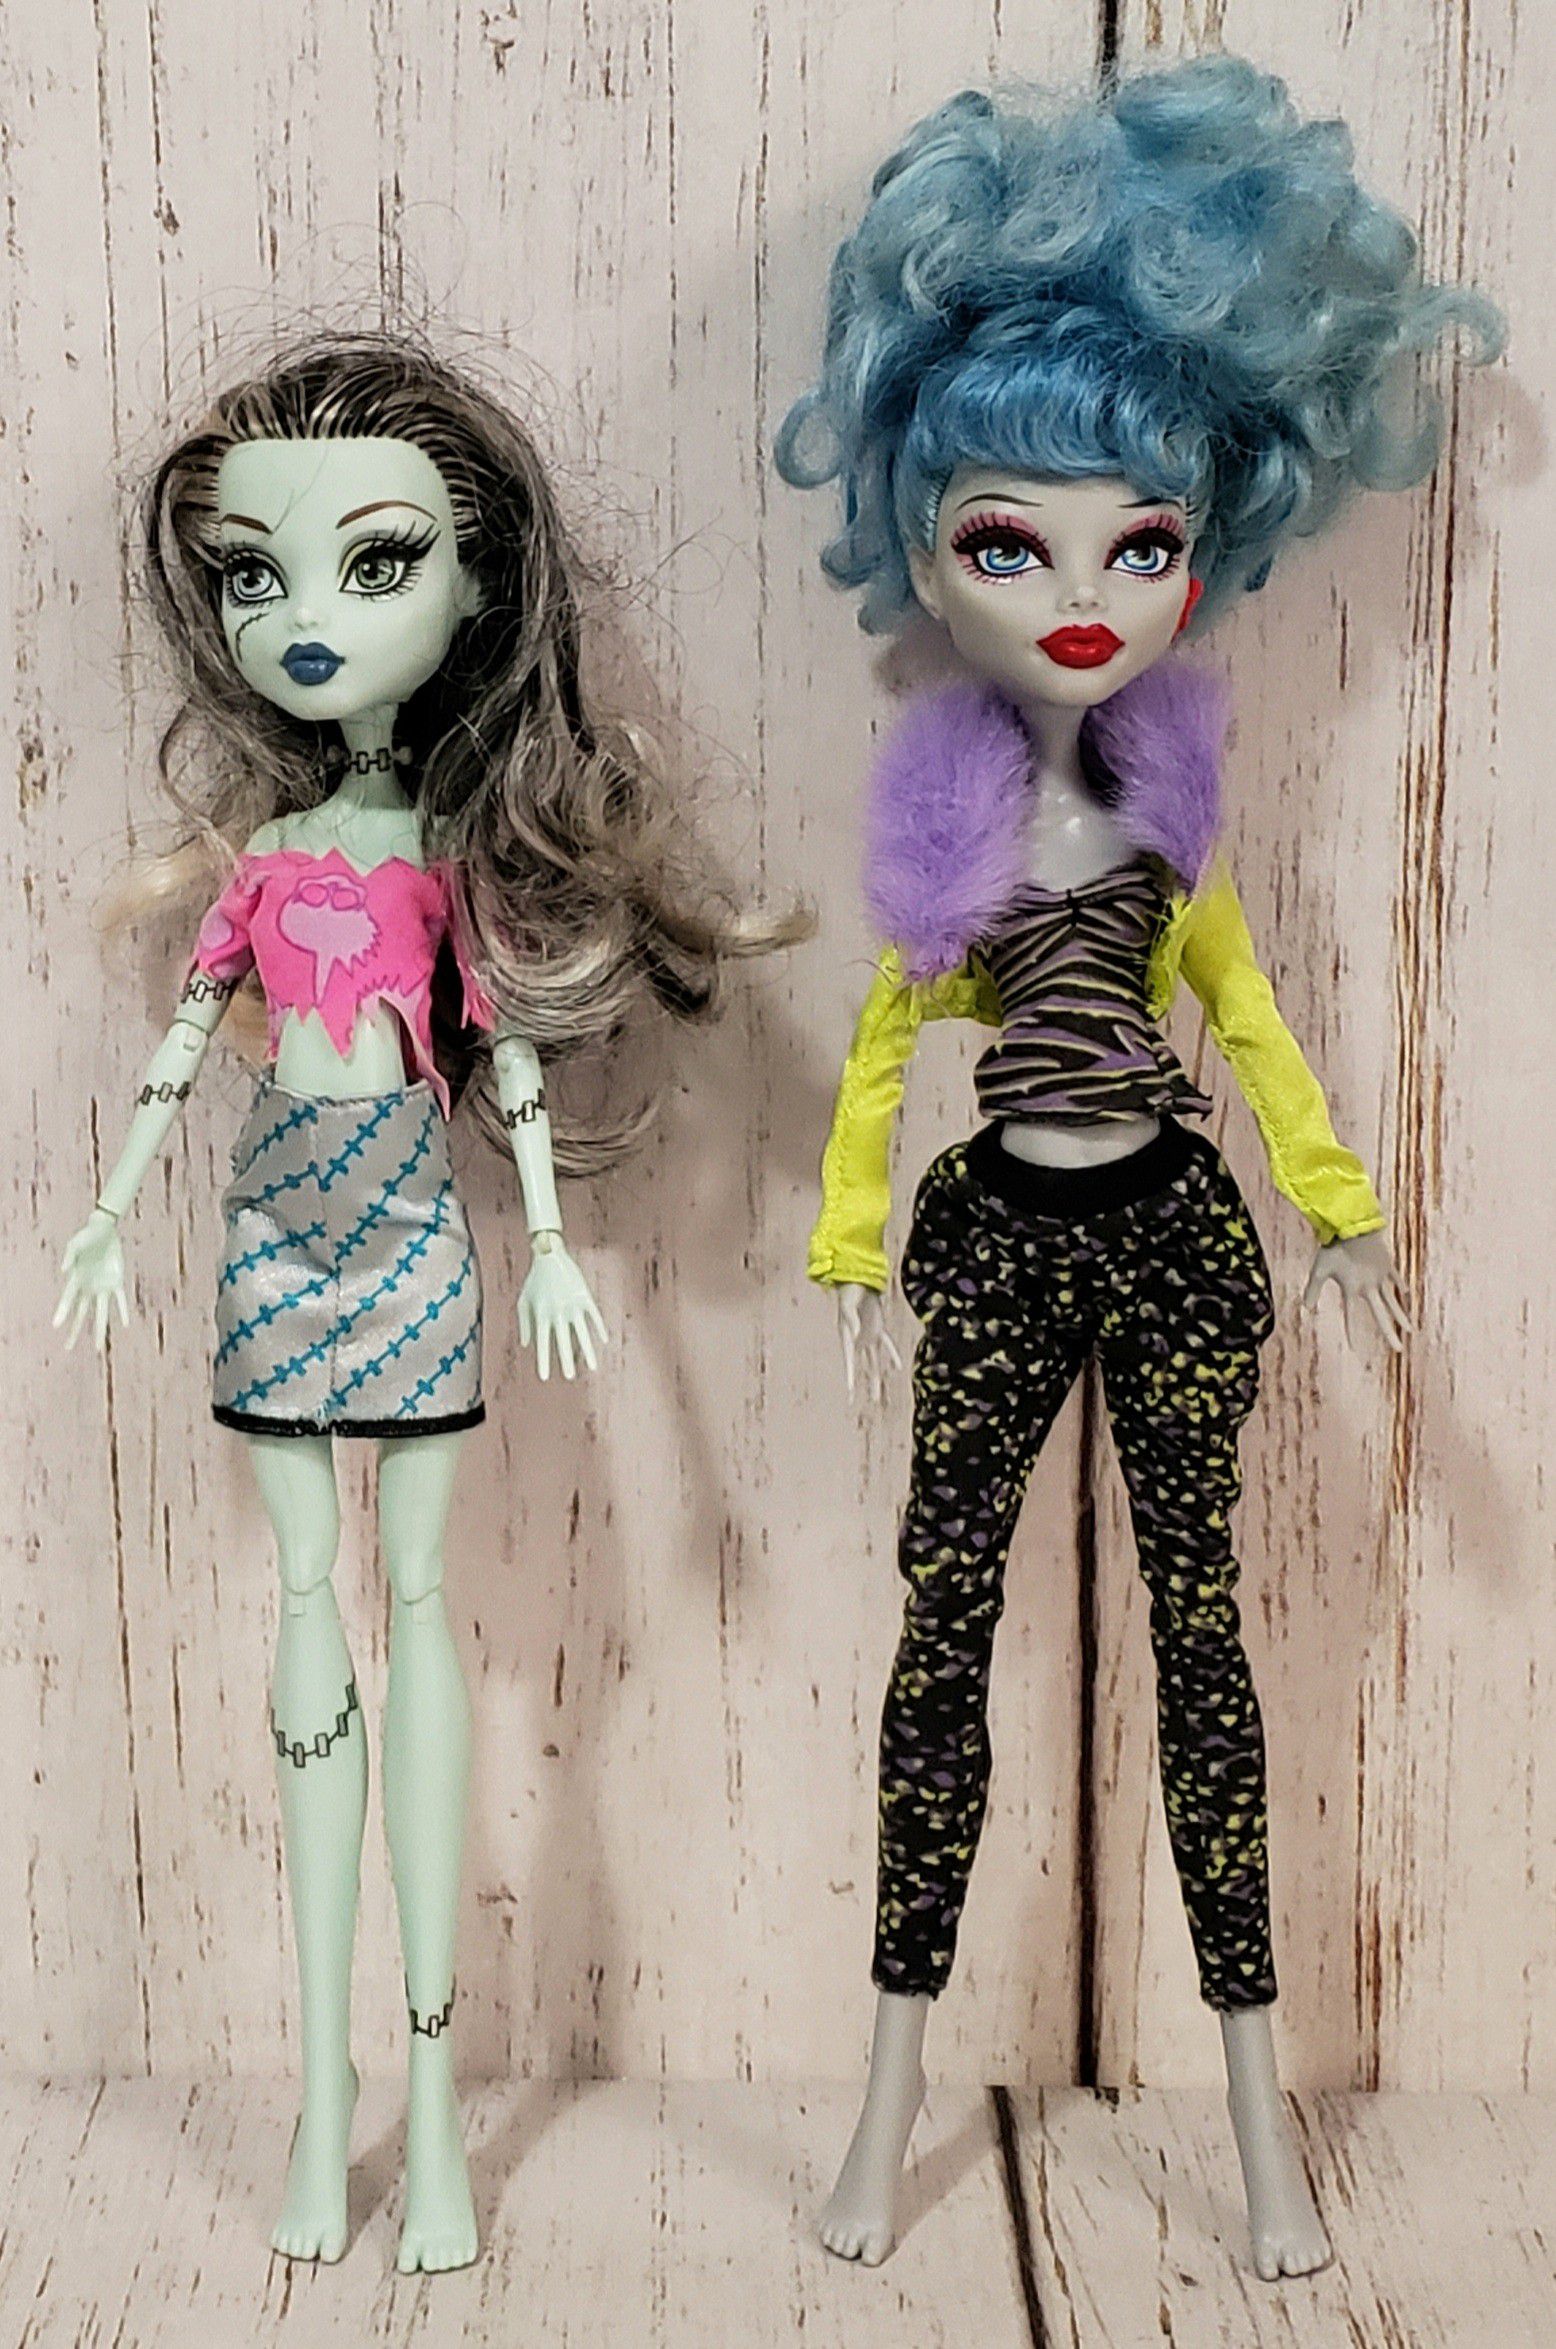 Monster High Dolls Lot of 2 - Great condition